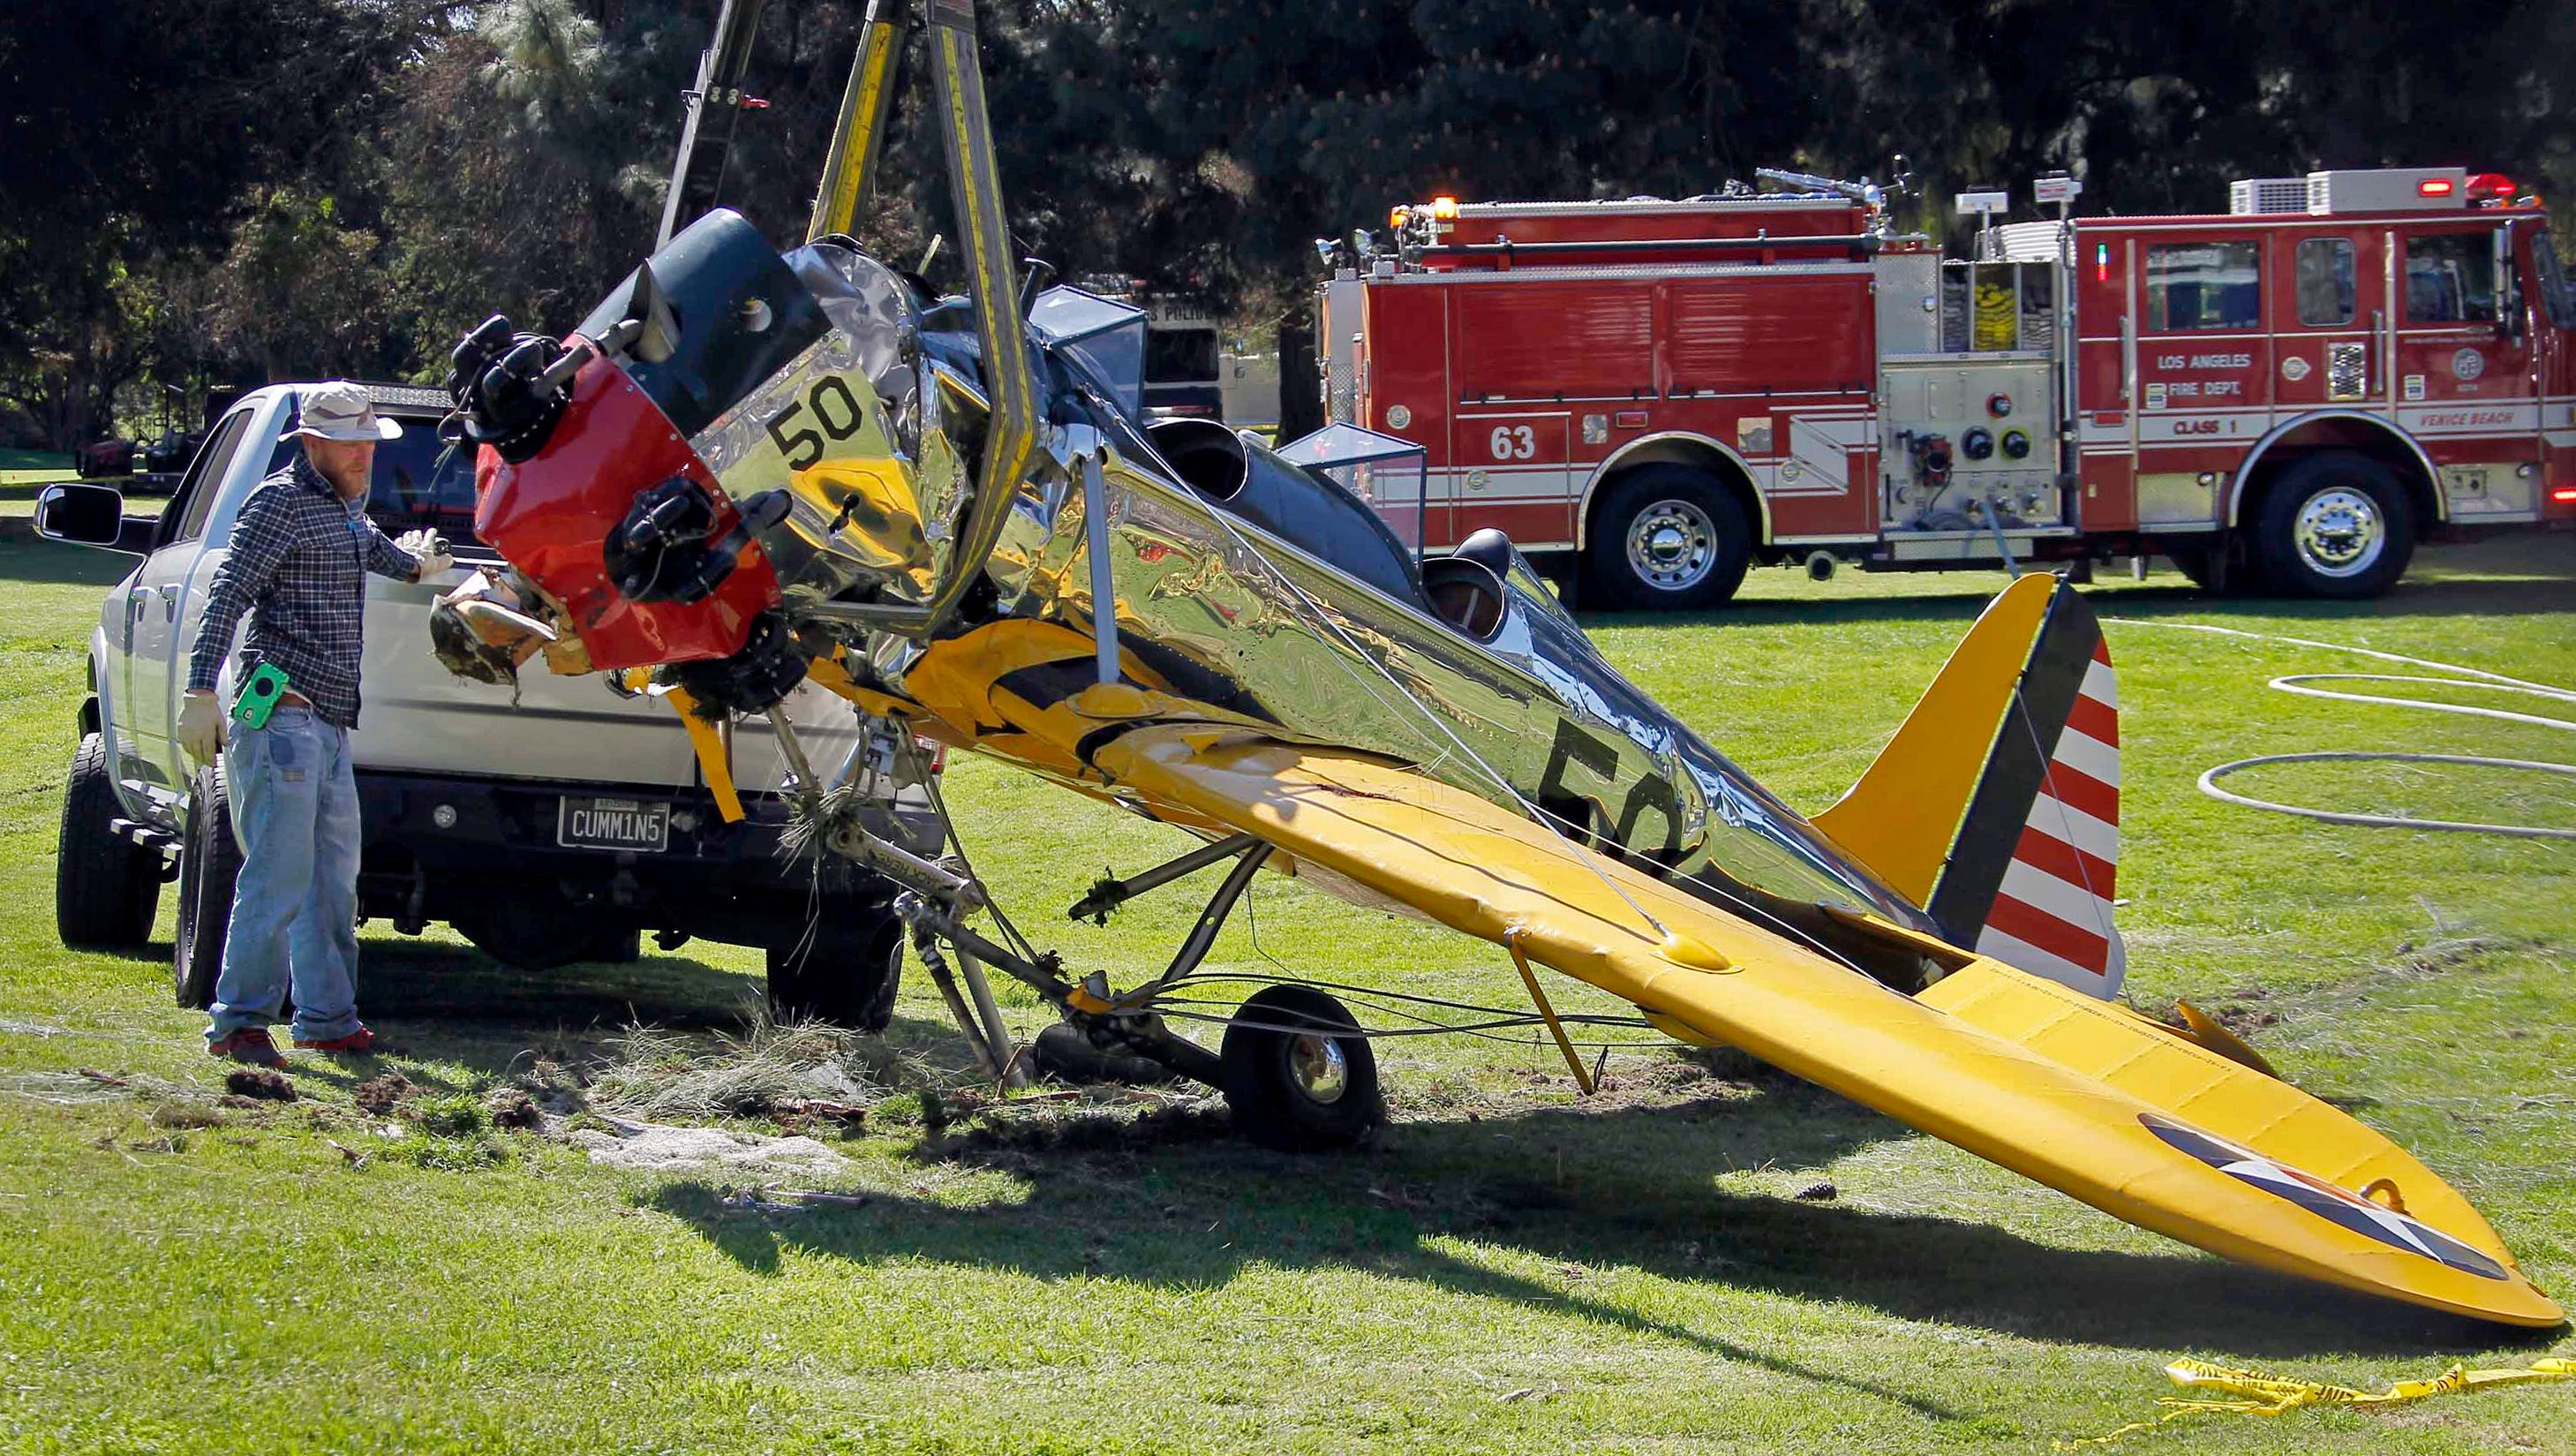 Harrison Ford was hospitalized after a plane crash in 2015. A problem with a carburetor part led to engine failure and the crash of the vintage airplane piloted by Ford in Santa Monica, Calif., according to the National Transportation Safety Board. The single-engine Ryan Aeronautical ST3KR struck a tree and crashed on a golf course about 800 feet from the runway, injuring the 73-year-old actor. No one on the ground was hurt.